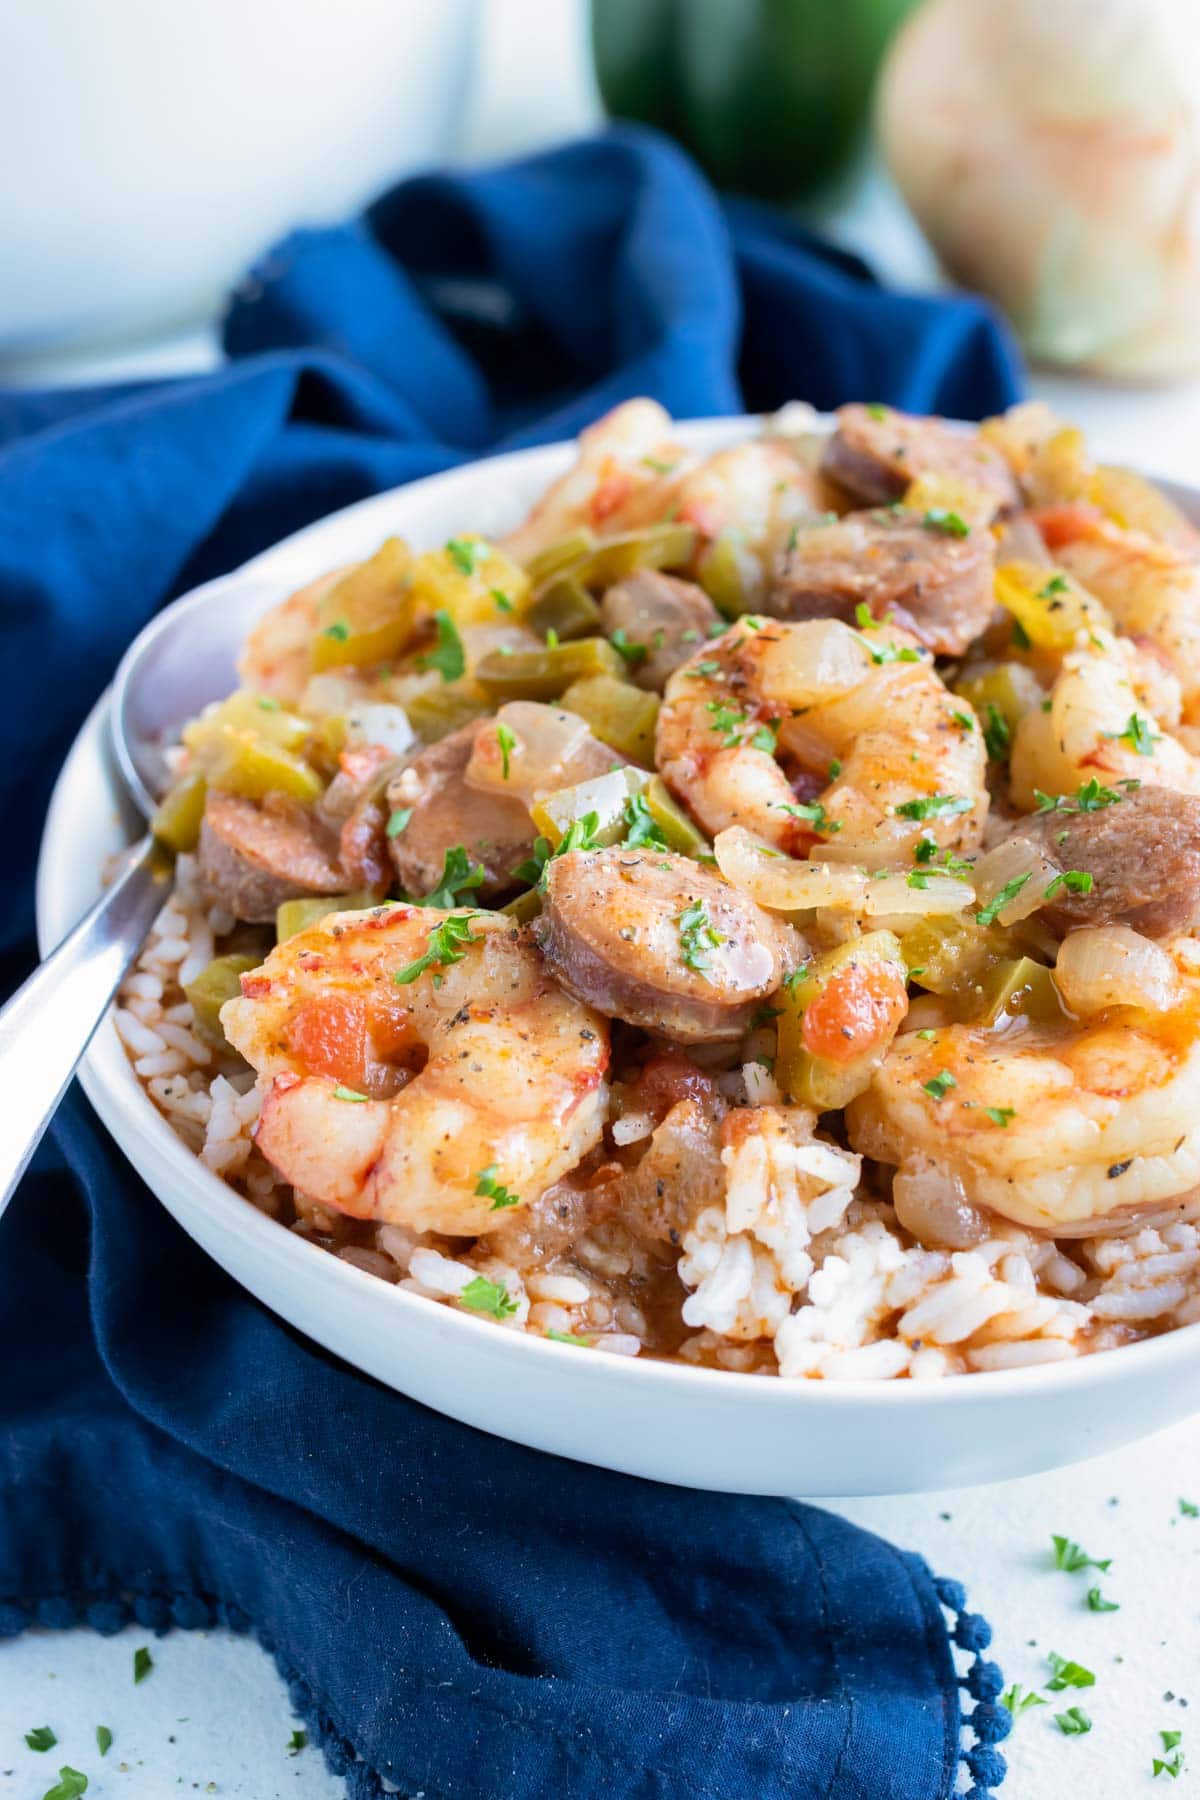 Gumbo made from scratch is placed with rice in a white bowl.